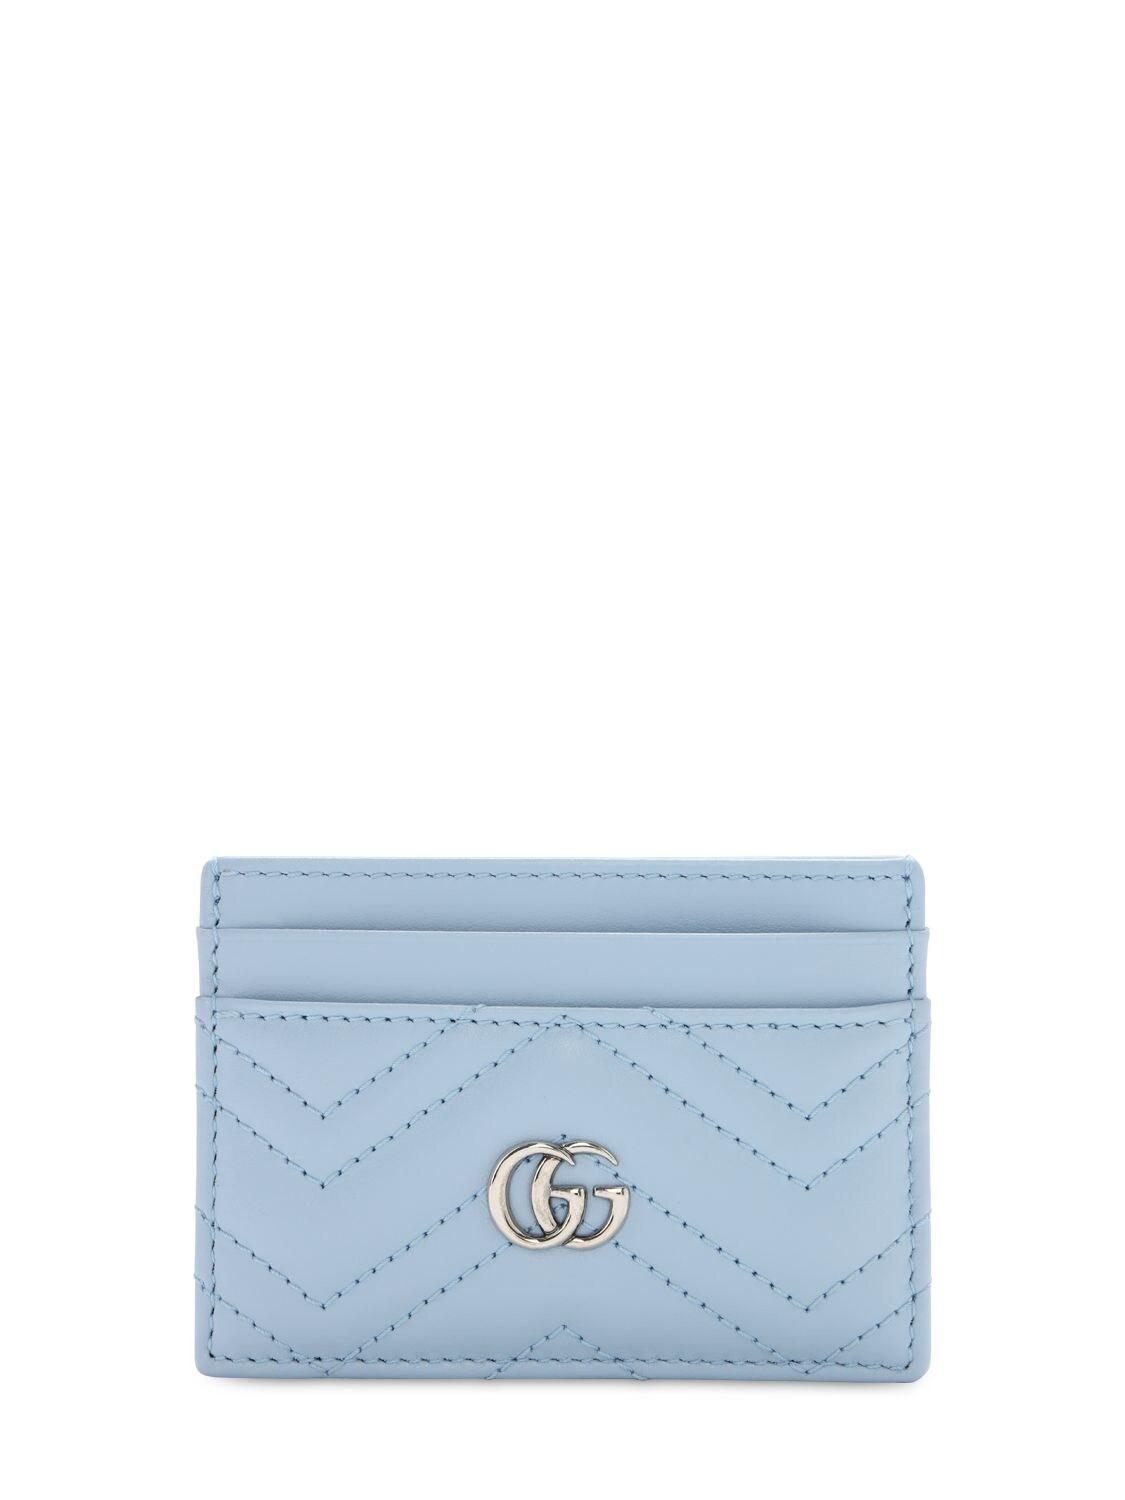 Gucci Synthetic GG Marmont Card Case in Light Blue (Blue) - Lyst